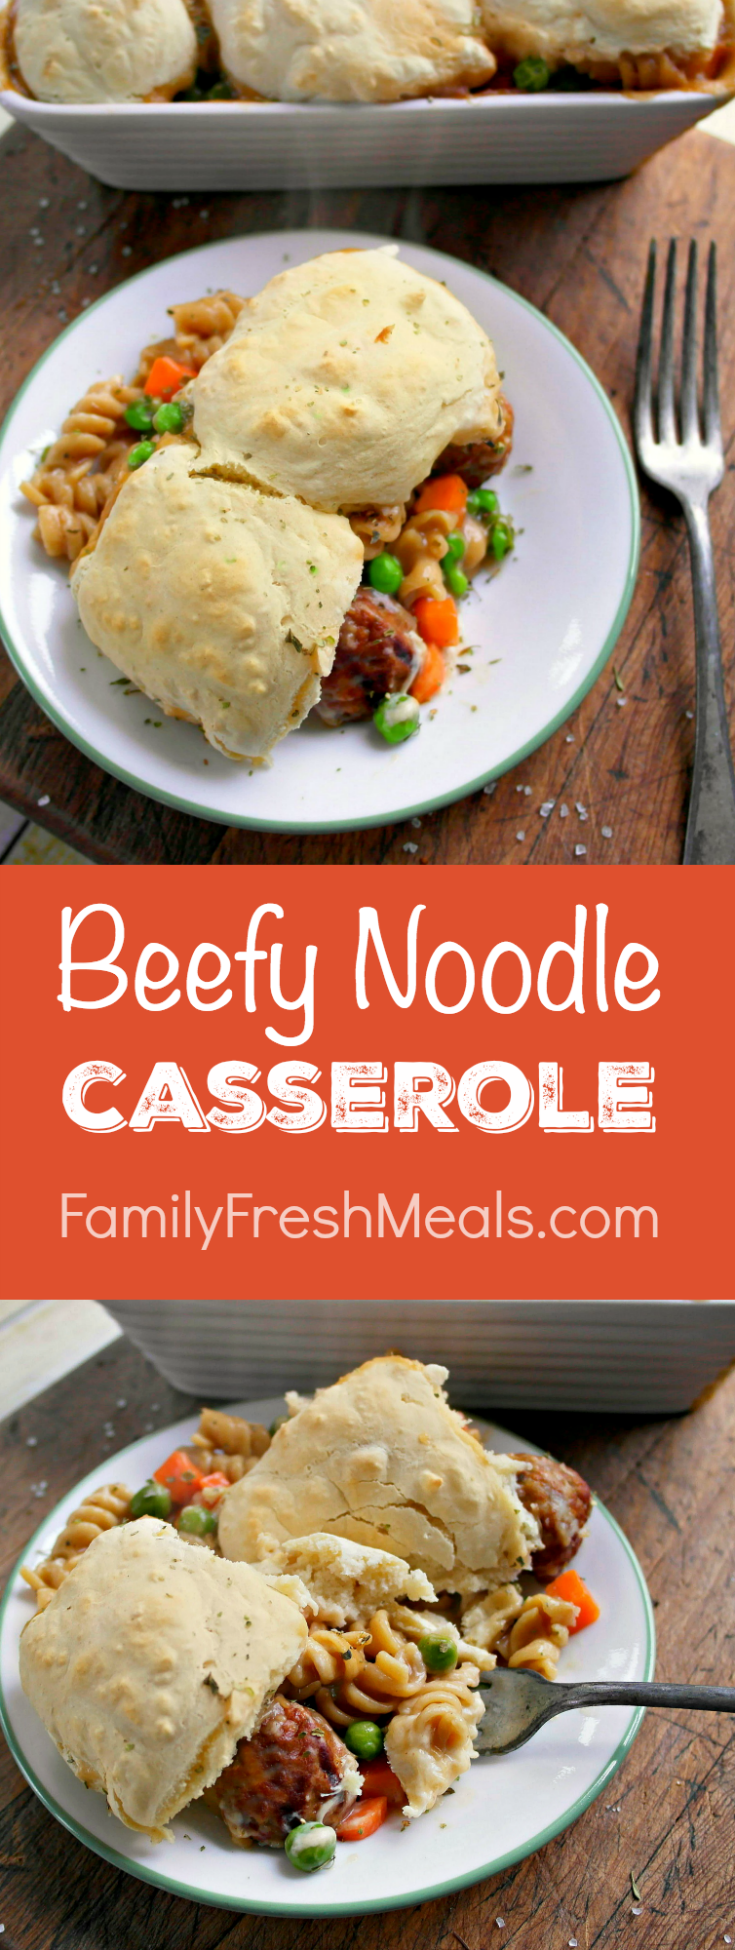 This Comforting Beefy Noodle Casserole is a whole meal packed into one dish: beef, veggies, noodles, and a nice brown gravy, all topped off with biscuits. via @familyfresh